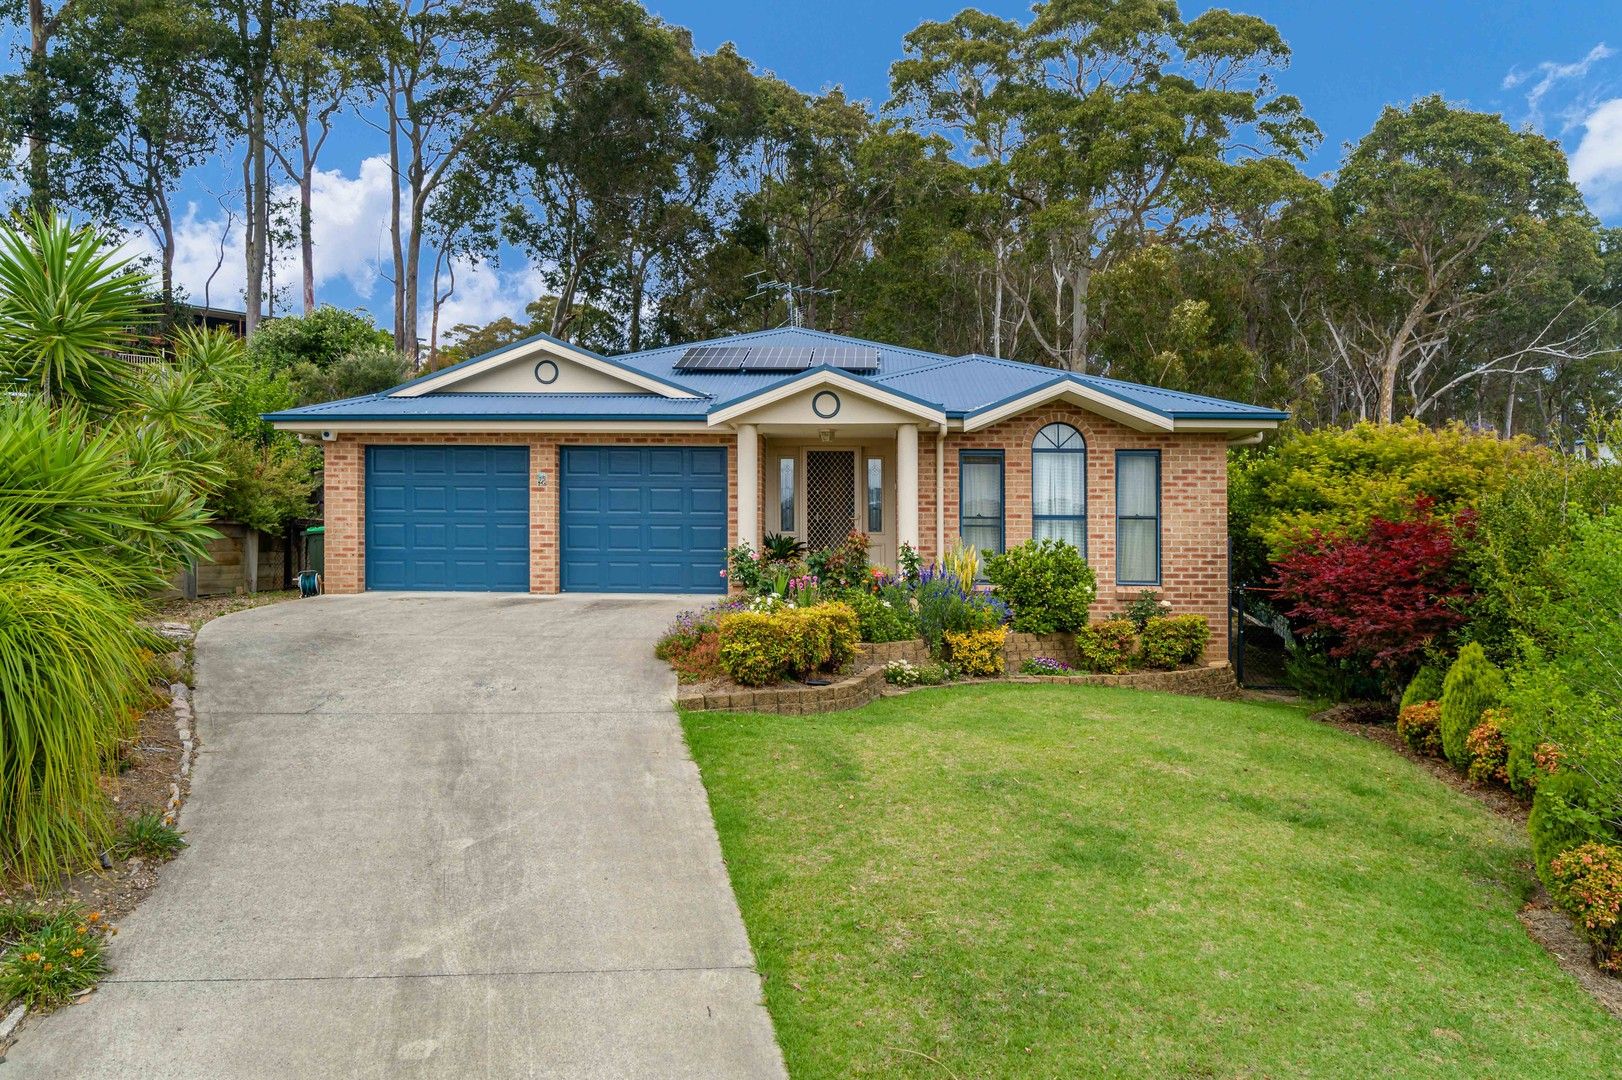 4 bedrooms House in 15 Rosemary Close MALUA BAY NSW, 2536